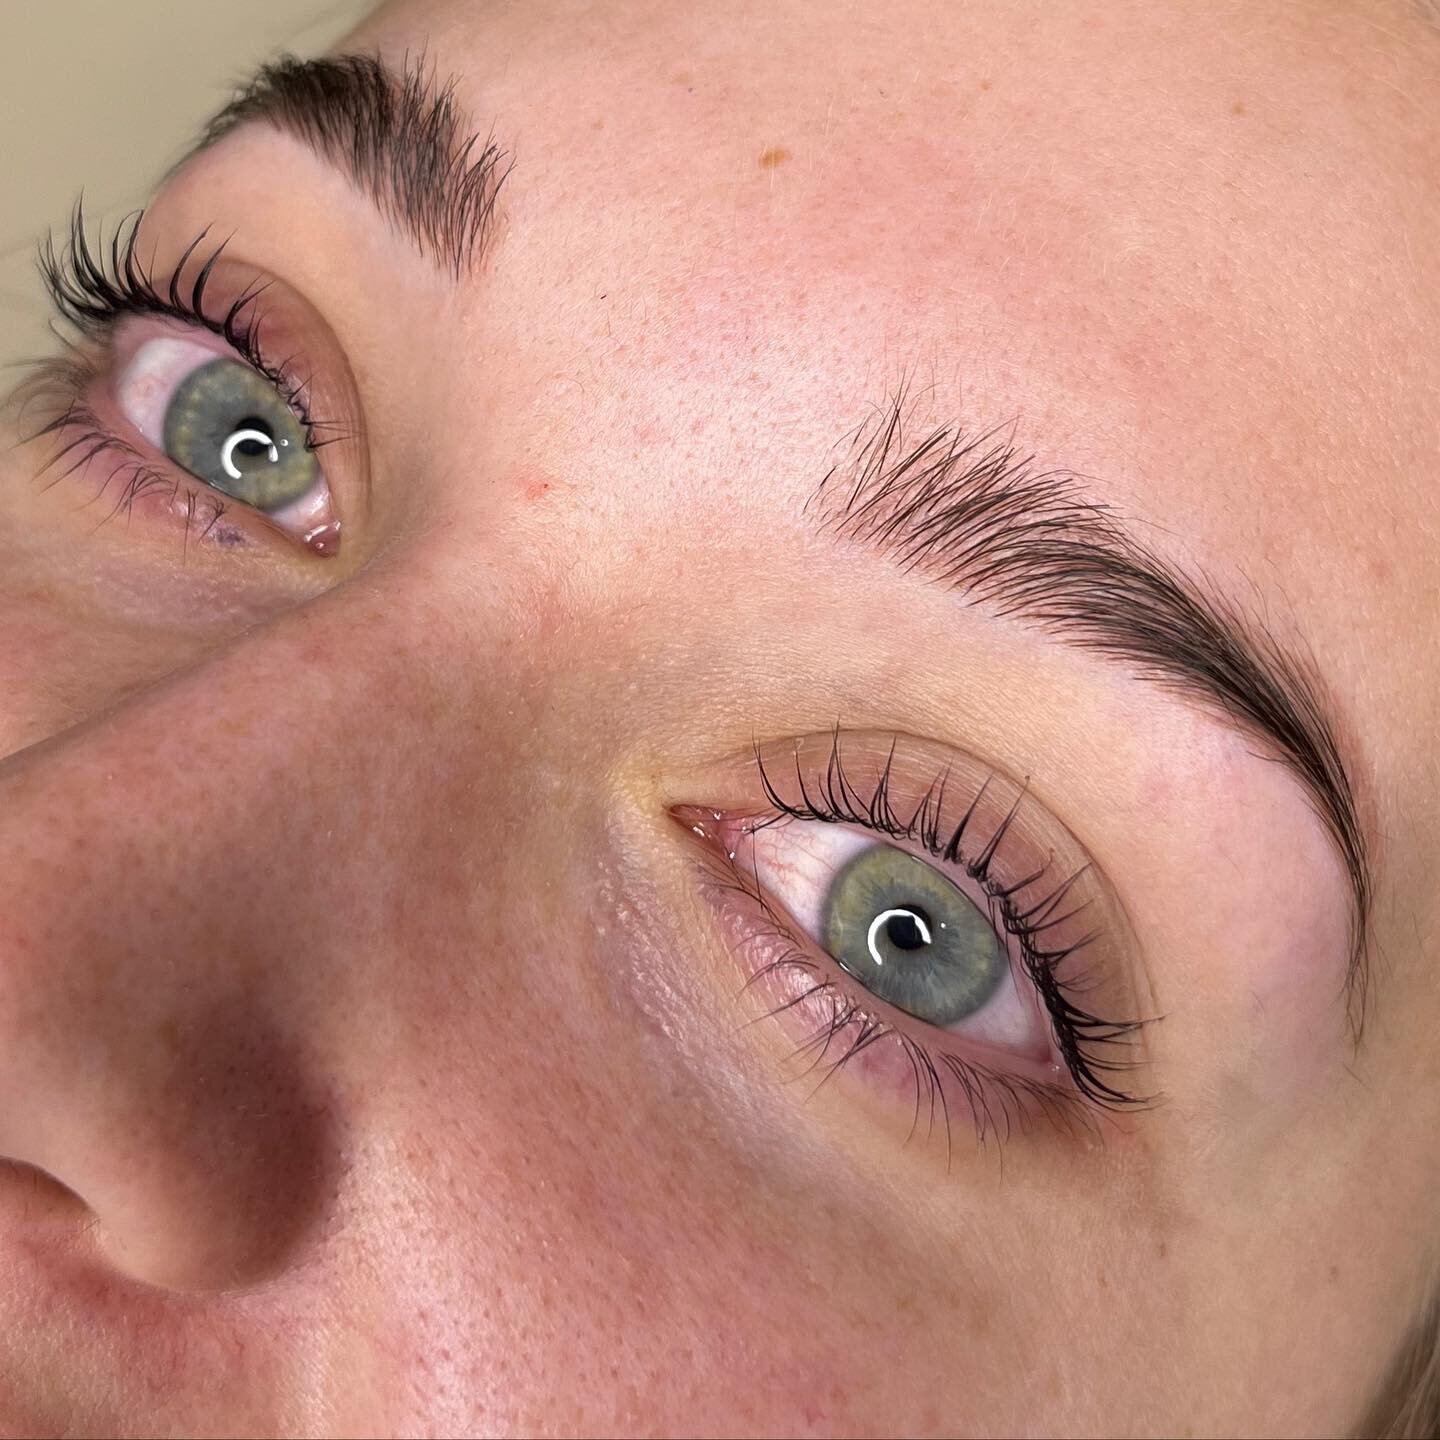 LASH FILLER @aesthetikbeautyco ✨

Shay is now offering Lash Filler treatments! 
Did you know, Lash Filler is clinically proven to increase the thickness of your lashes up to 24% after 3 treatments?

To learn more and book appointments, head over to @